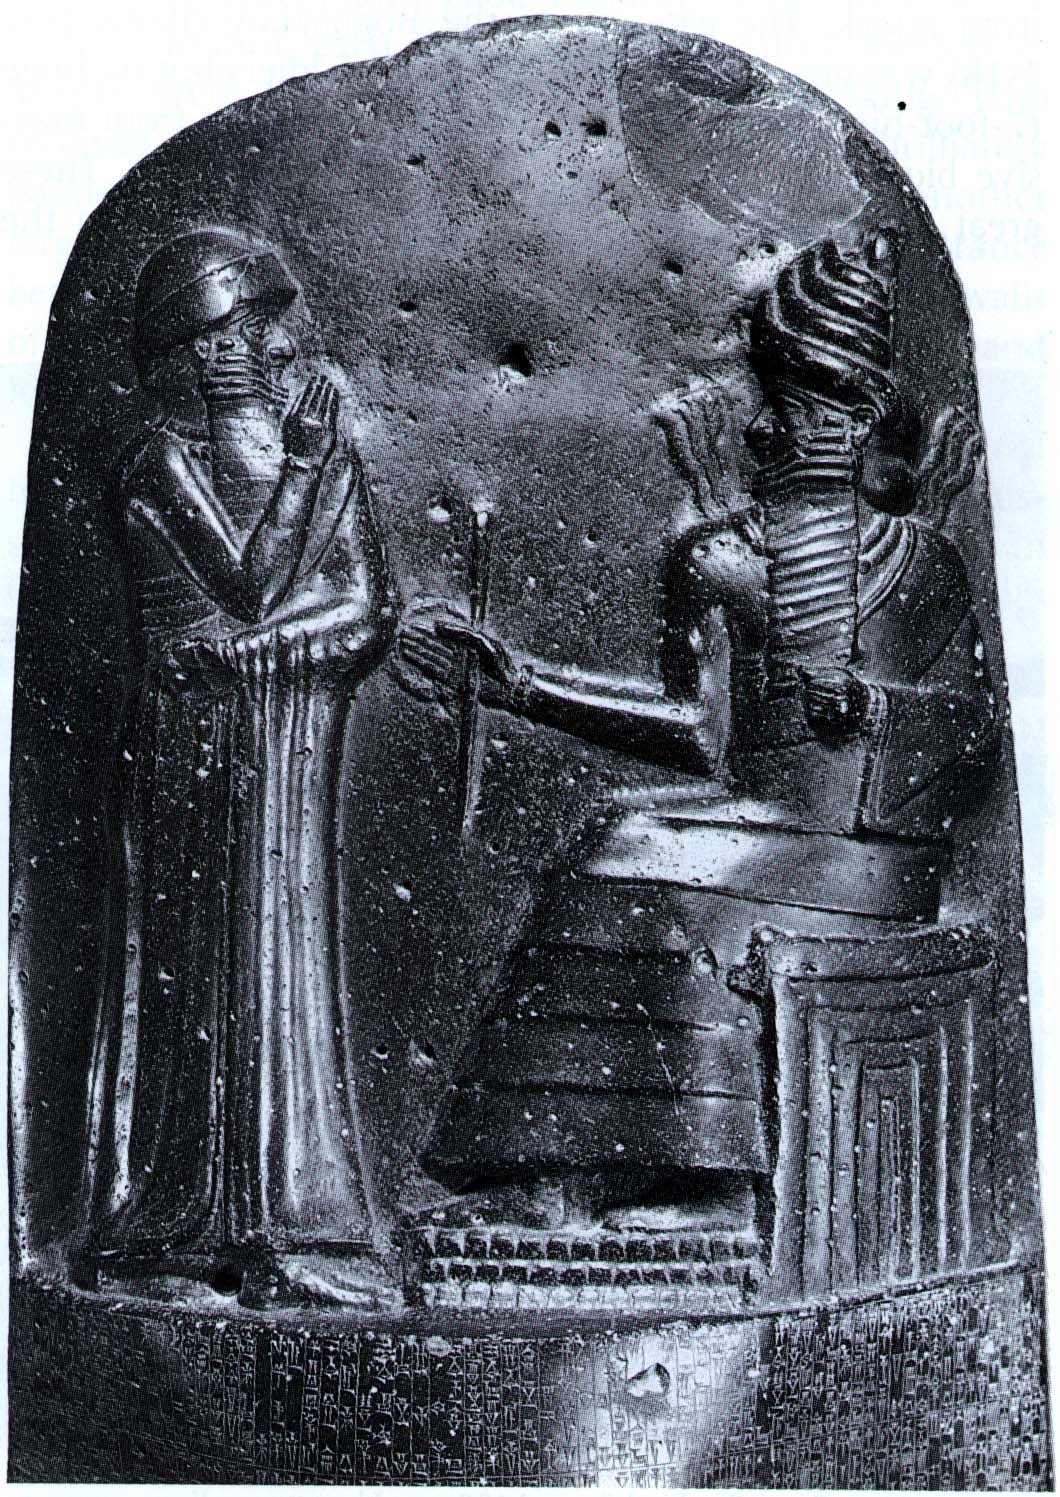 Stele with Law Code of Hammurabi https://www.historians.org/teaching-and-learning/teaching-resources-for-historians/teaching-and-learning-in-the-digital-age/images-of-power-art-as-an-historiographic-tool/stele-with-law-code-of-hammurabi